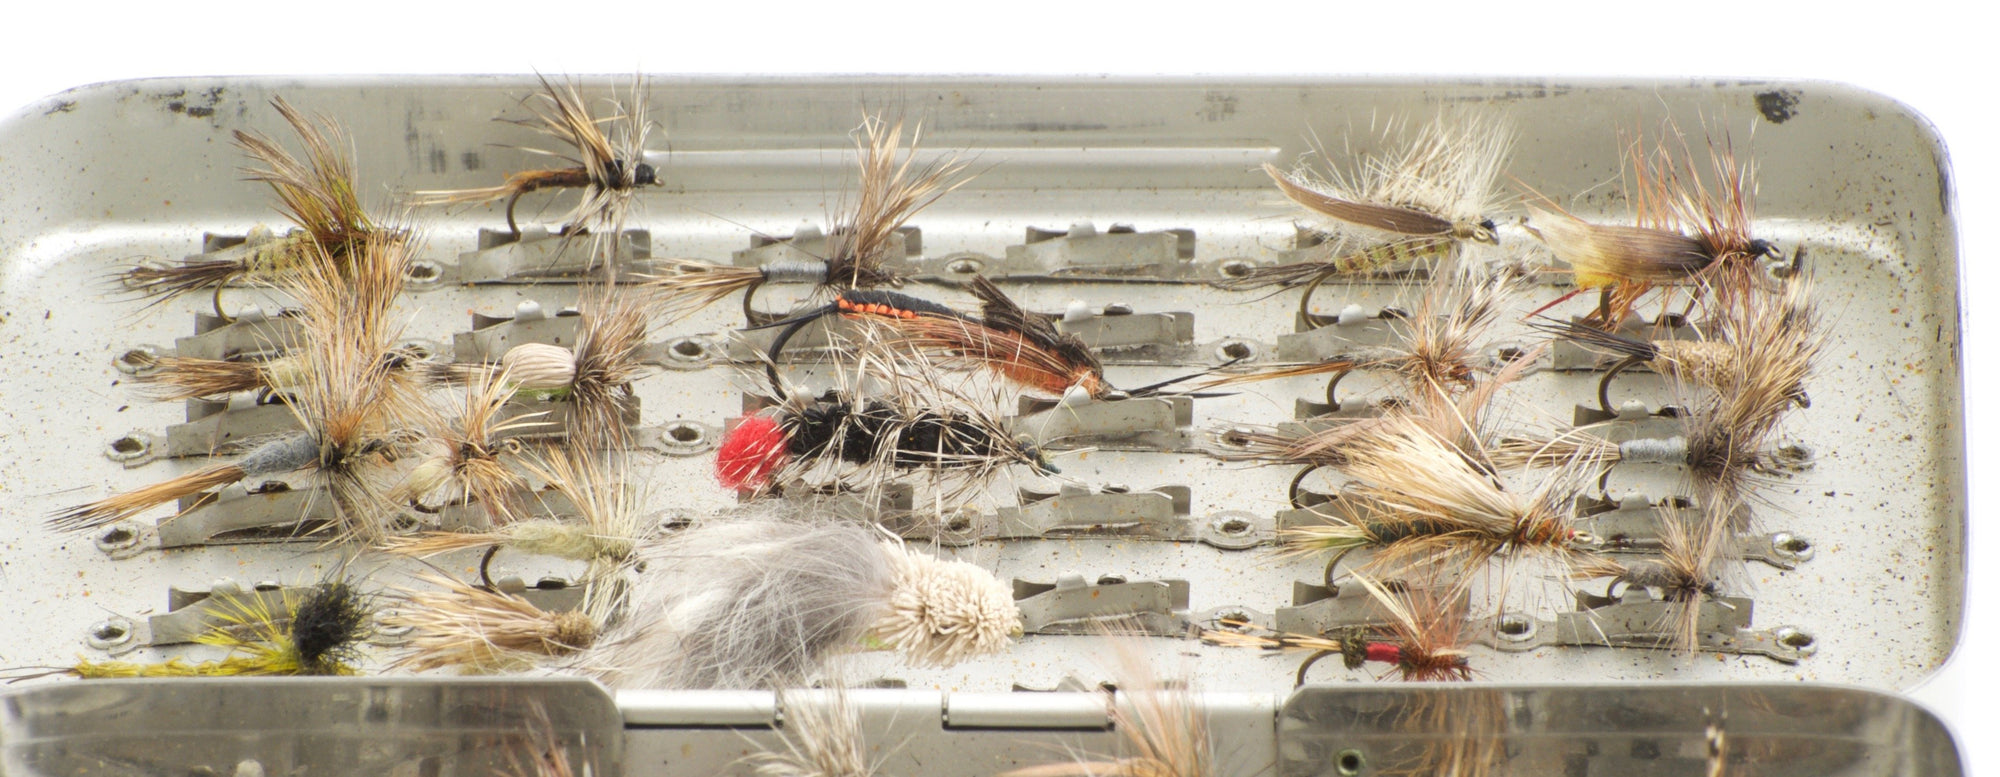 Fly-Safe (Barre, Vermont) Fly Box - with assorted dry flies 